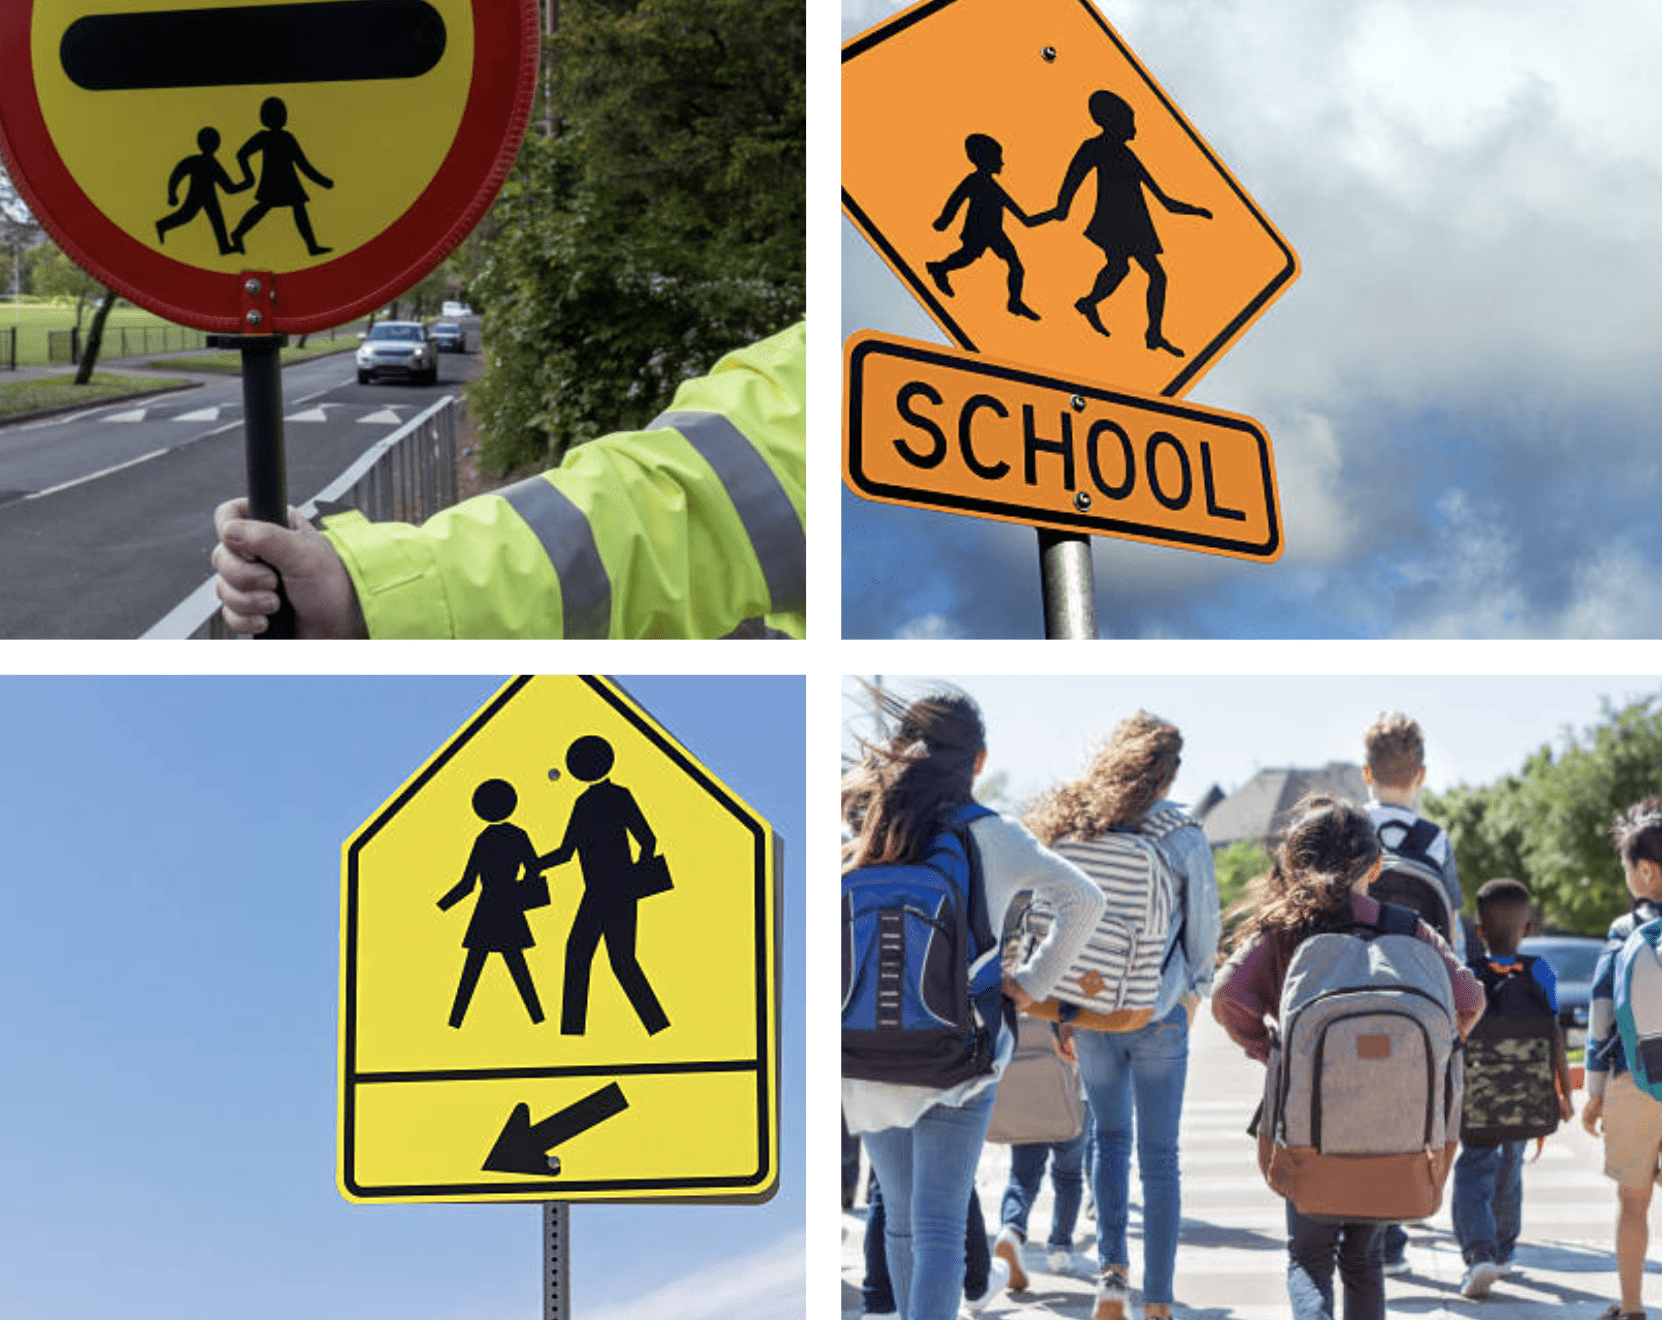 TxDOT URGES DRIVERS TO BE ALERT AS KIDS RETURN TO SCHOOL